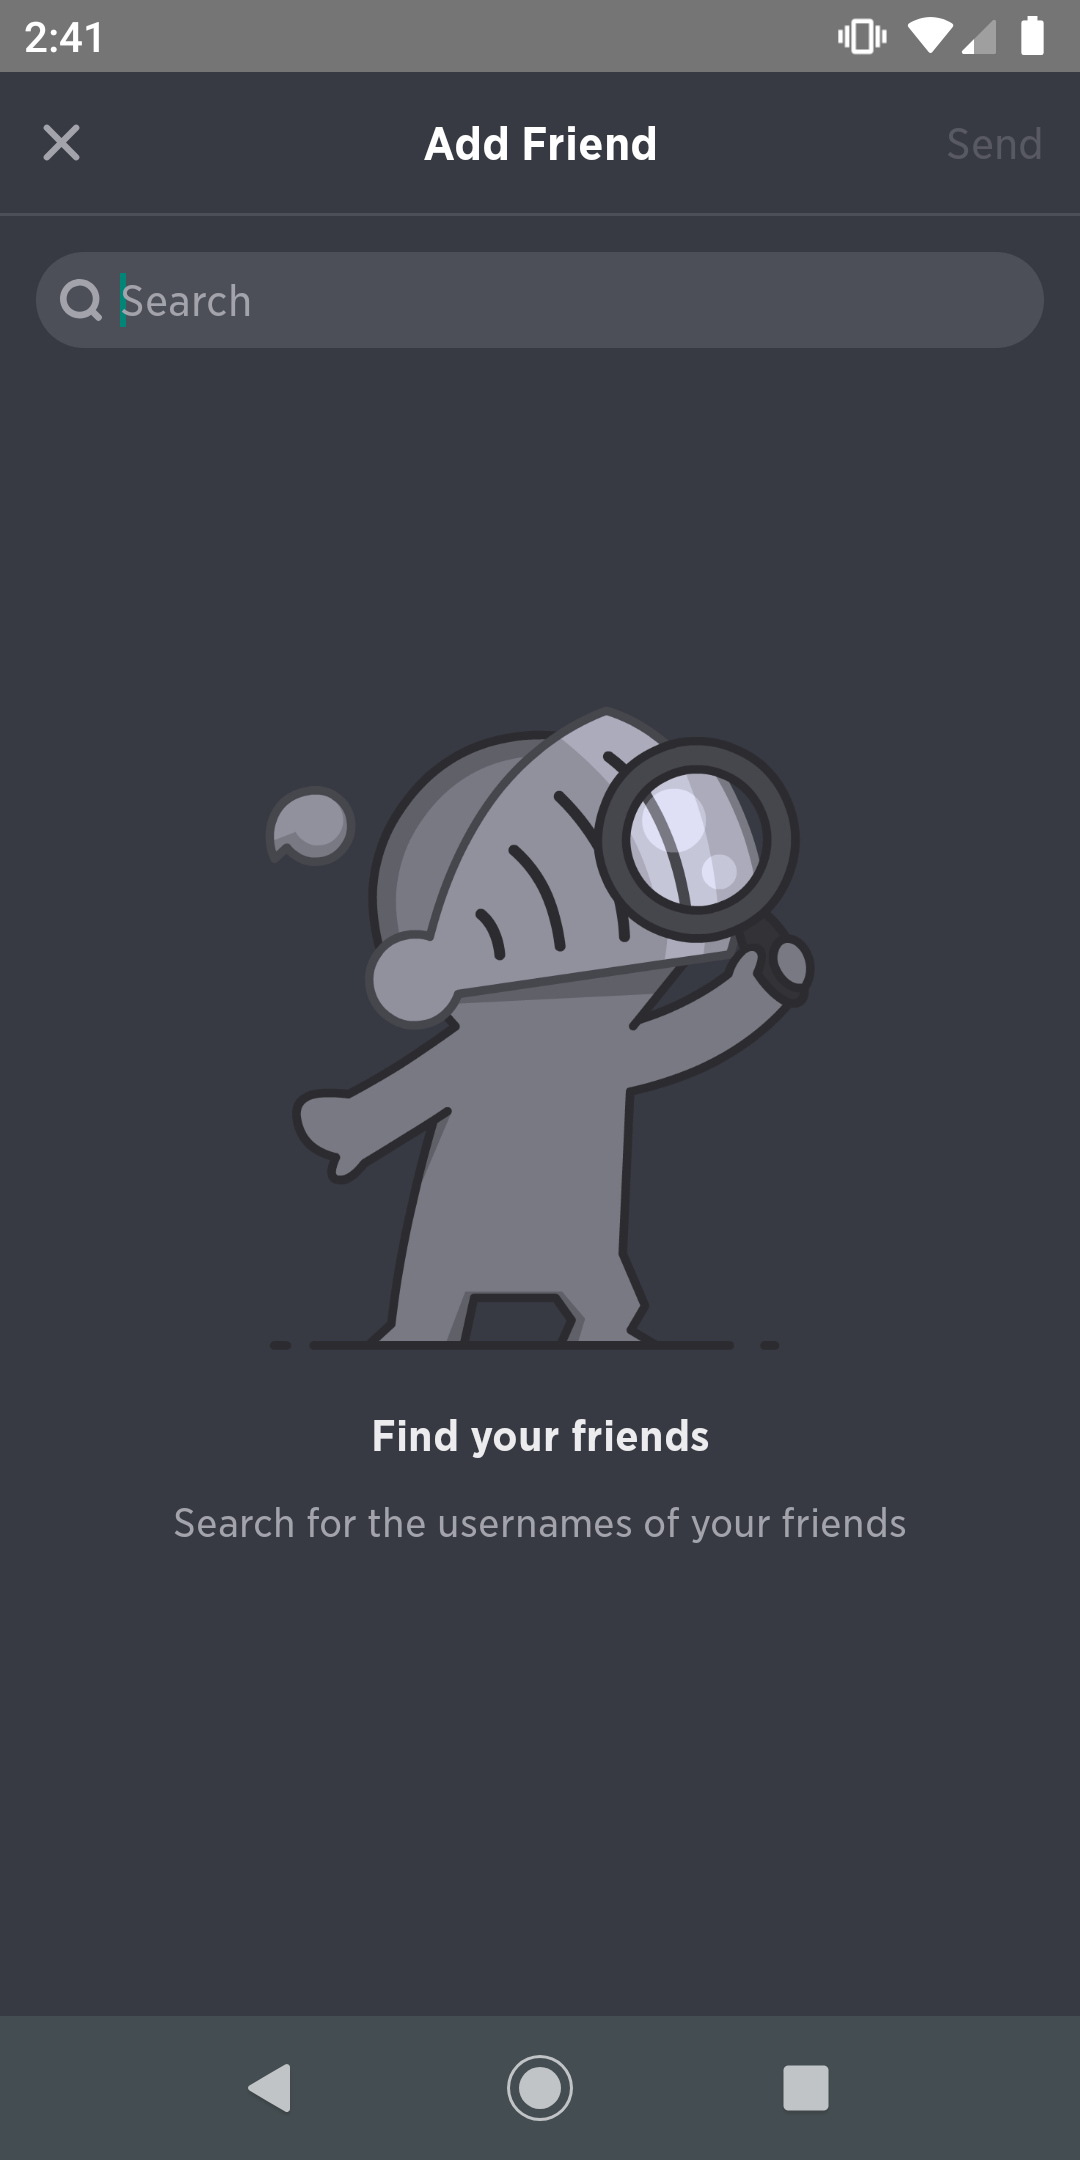 Search_for_friend_on_mobile.png